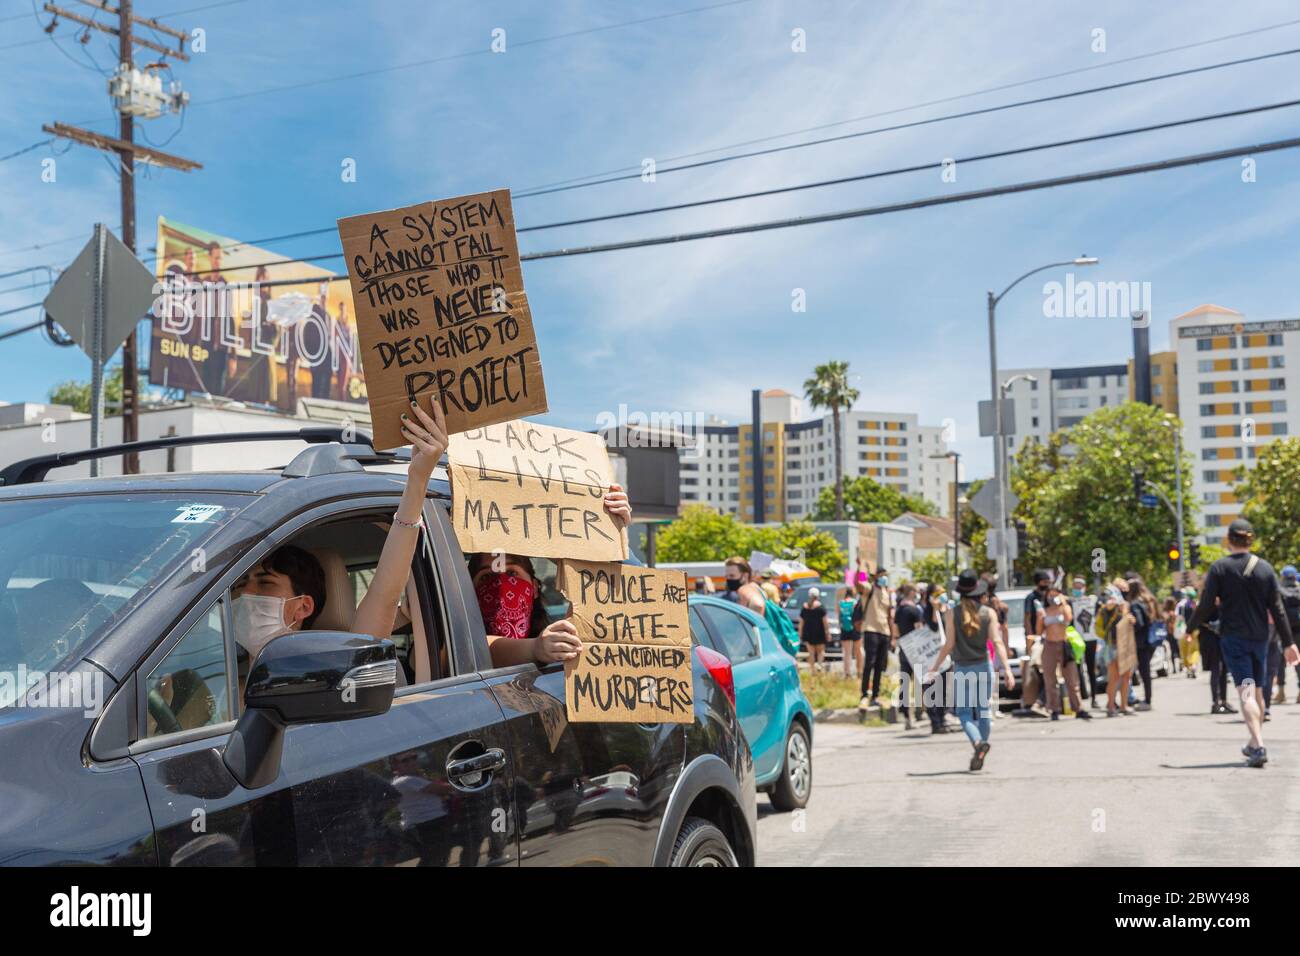 Protesters in their cars at Black Lives Matter protest over the killing of George Floyd: Fairfax District, Los Angeles, CA, USA - May 30, 2020 Stock Photo